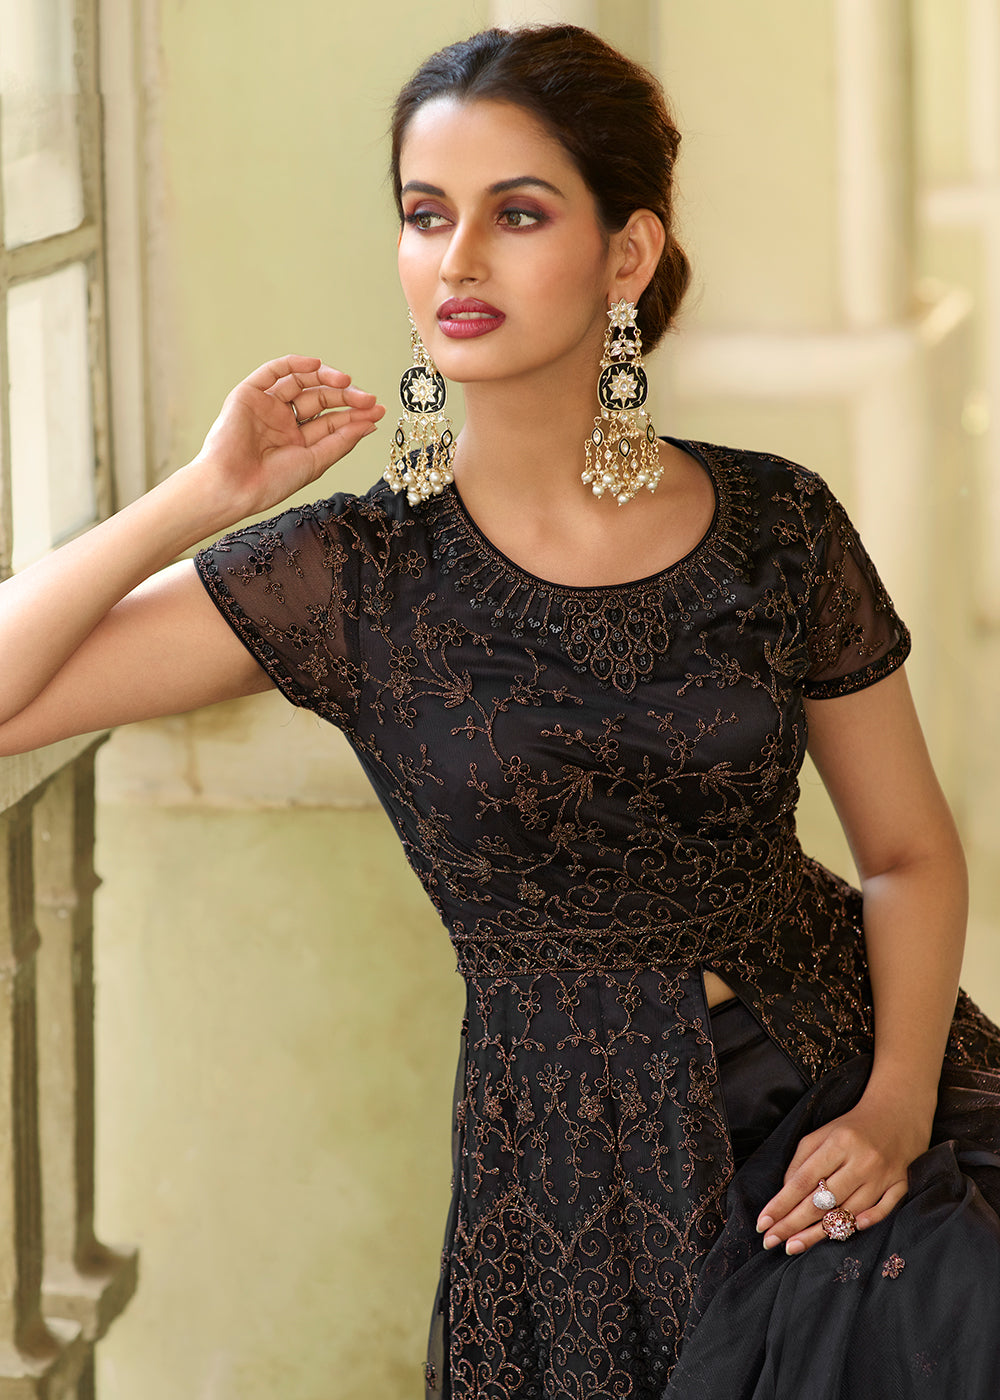 Buy Now Slit Style Exquisite Black Zari Embroidered Party Festive Anarkali Suit Online in USA, UK, Australia, New Zealand, Canada & Worldwide at Empress Clothing.